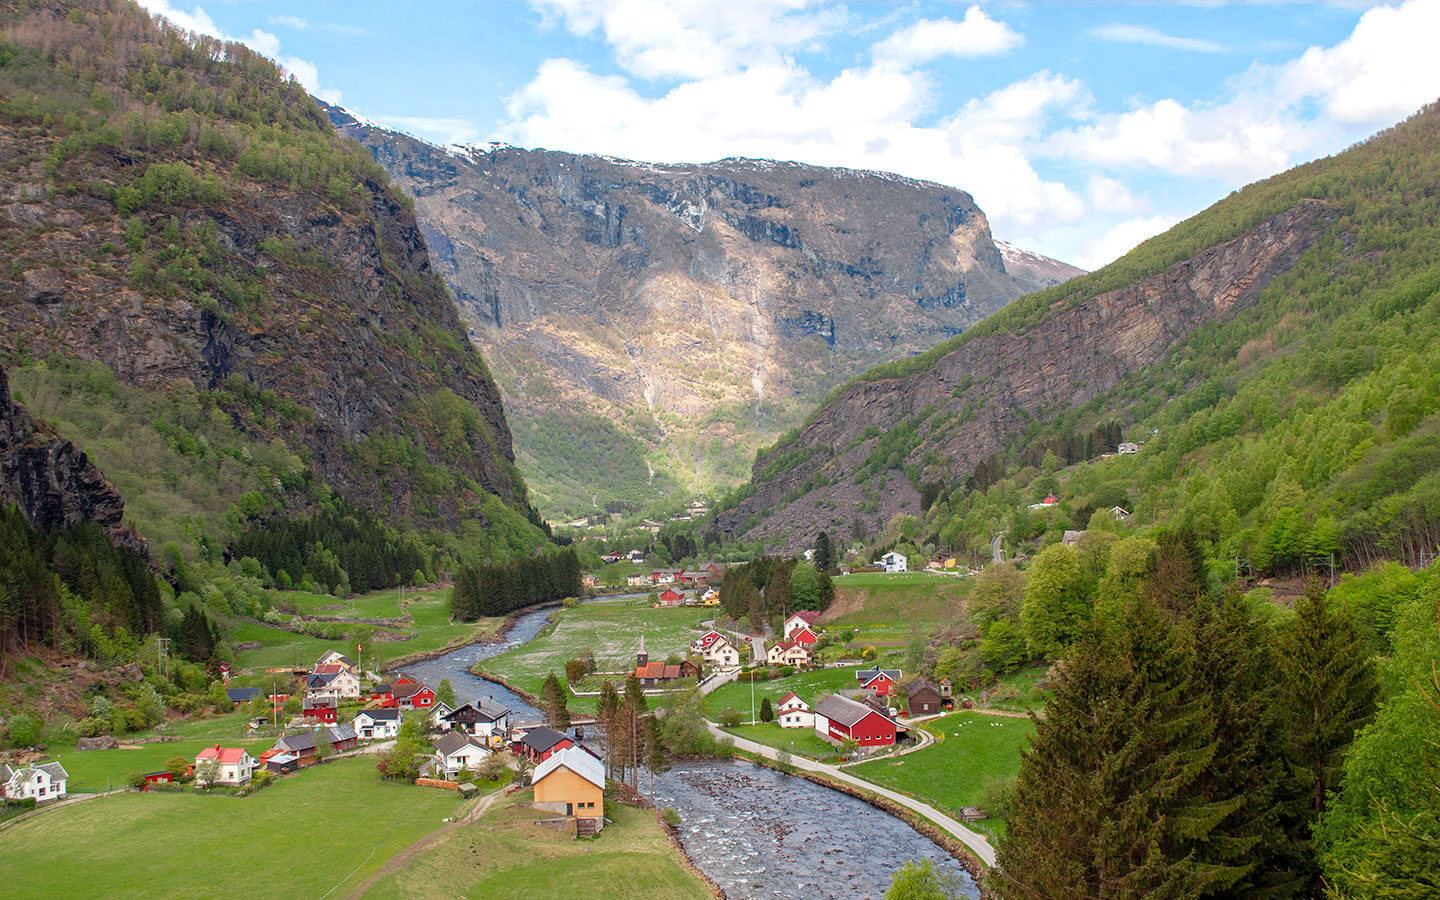 A guide to the Flam Railway: Norway's most scenic train trip